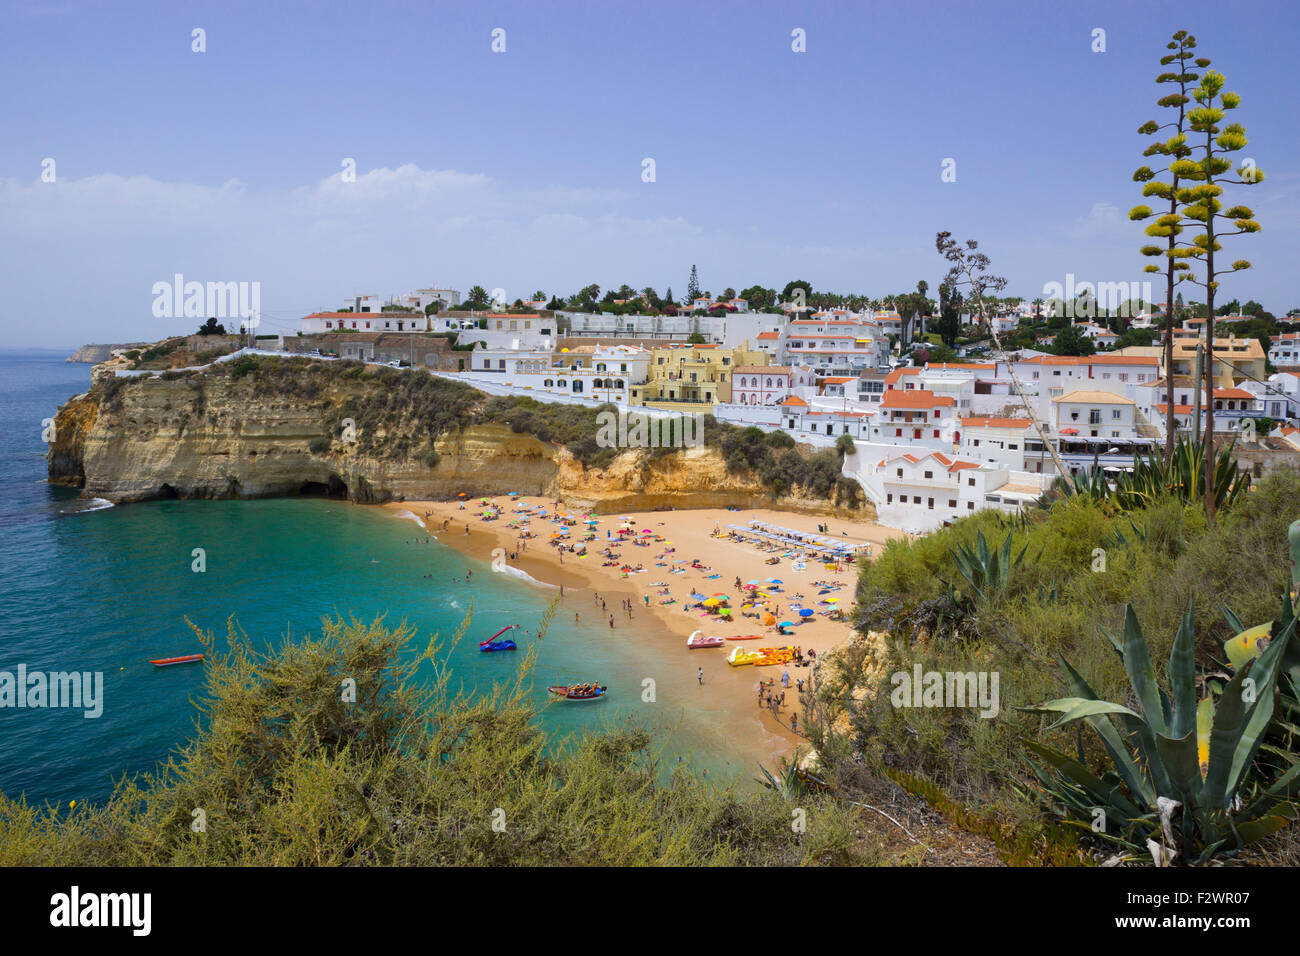 A View of Carvoeiro, Portugal from the cliff top Stock Photo